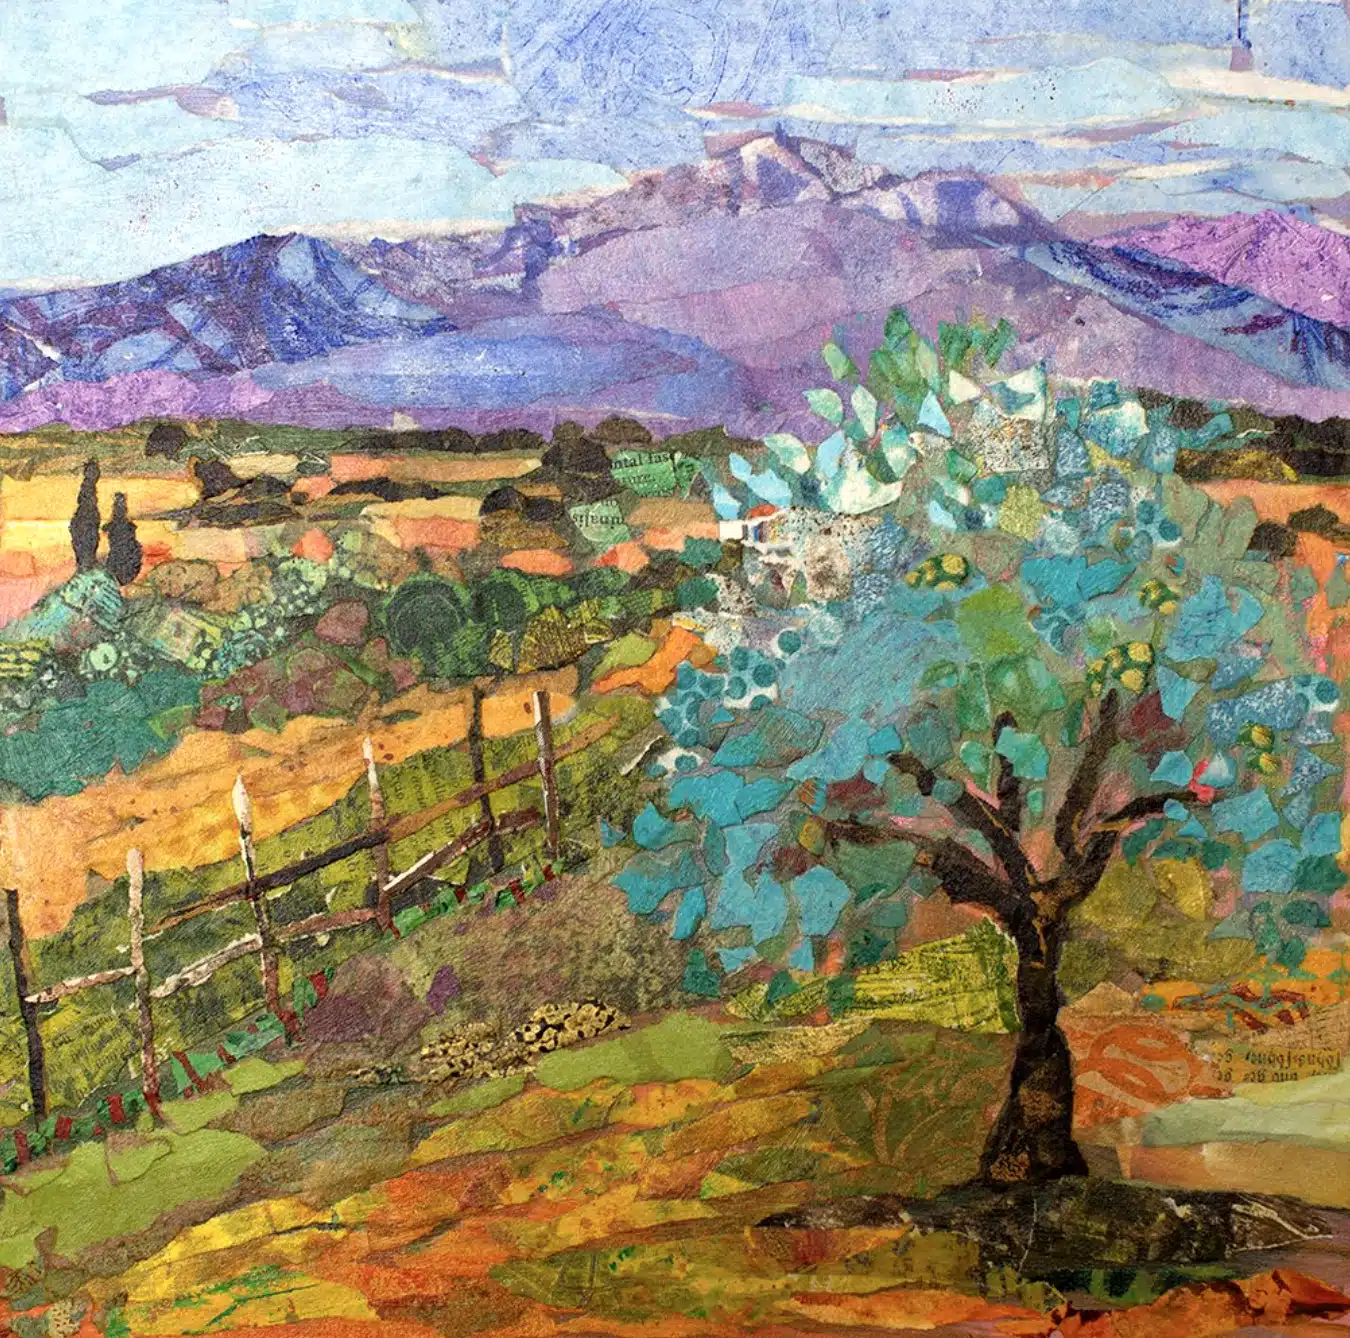 “Tuscan Olive Tree” by Elizabeth St. Hilaire